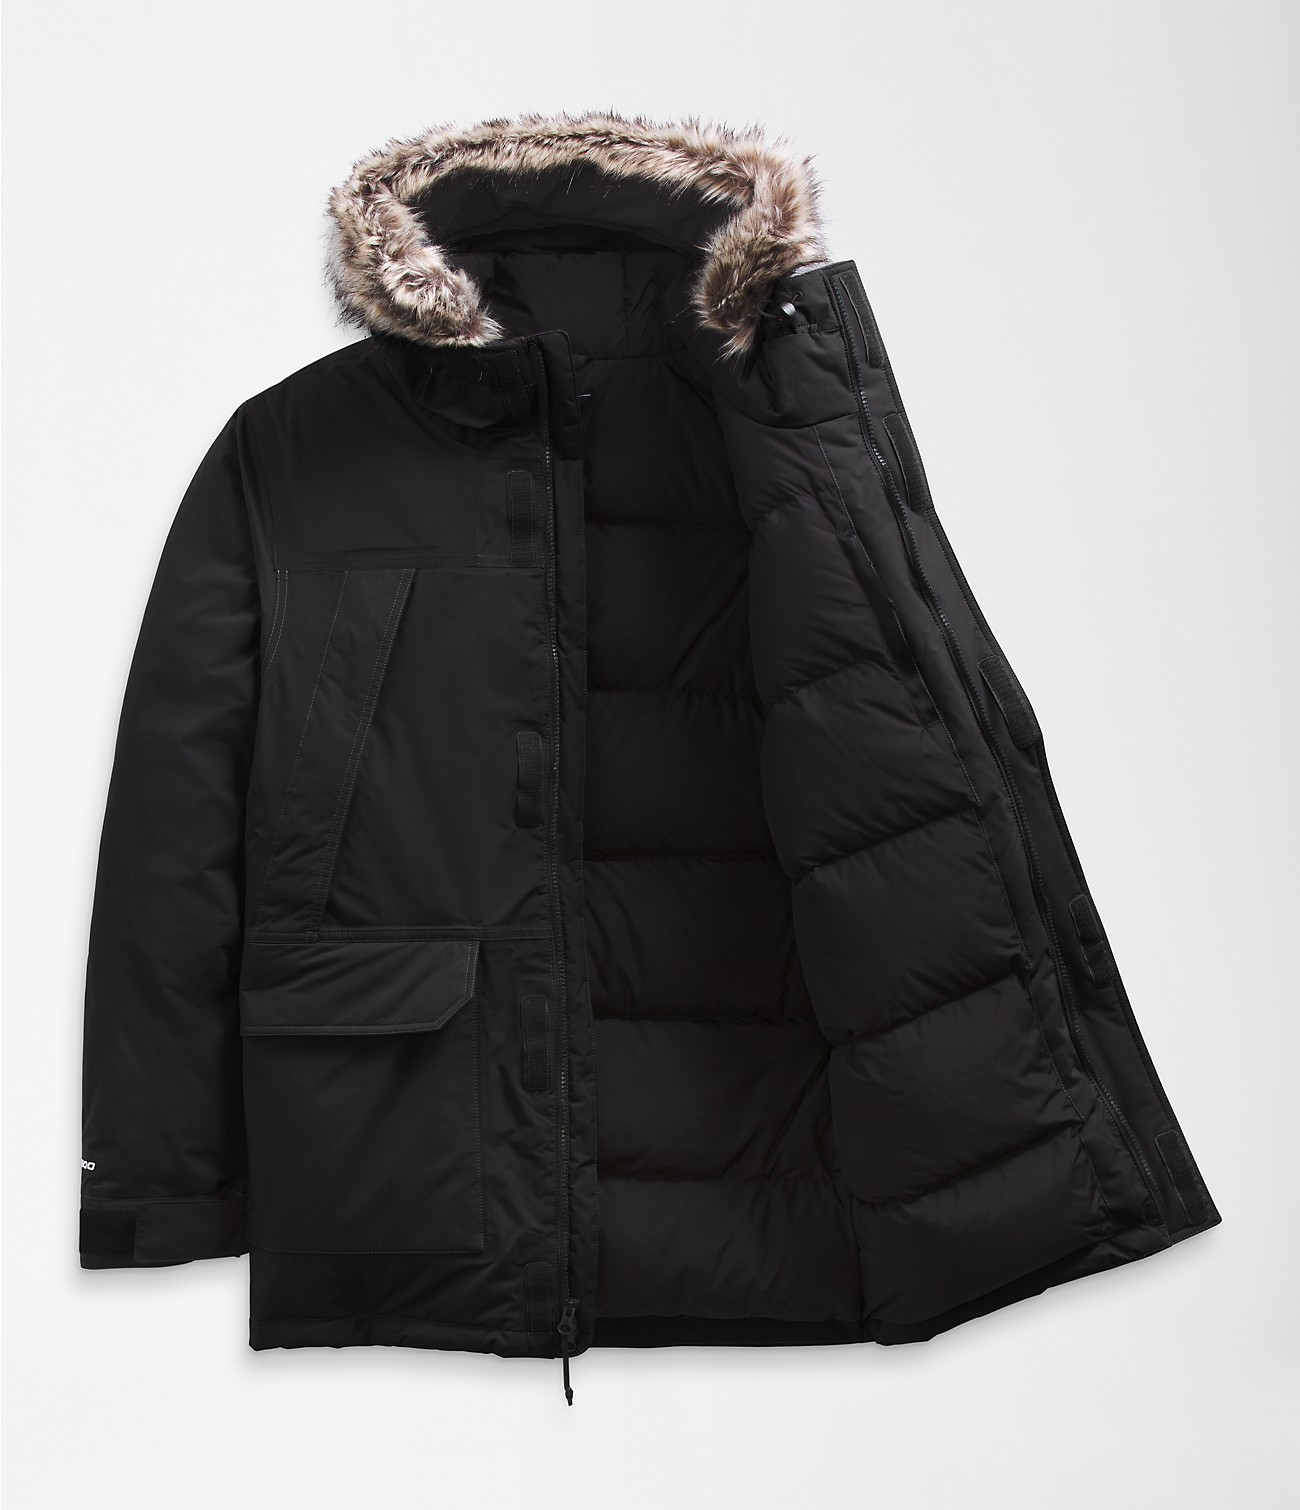 Unlock Wilderness' choice in the Patagonia Vs North Face comparison, the McMurdo Parka by The North Face